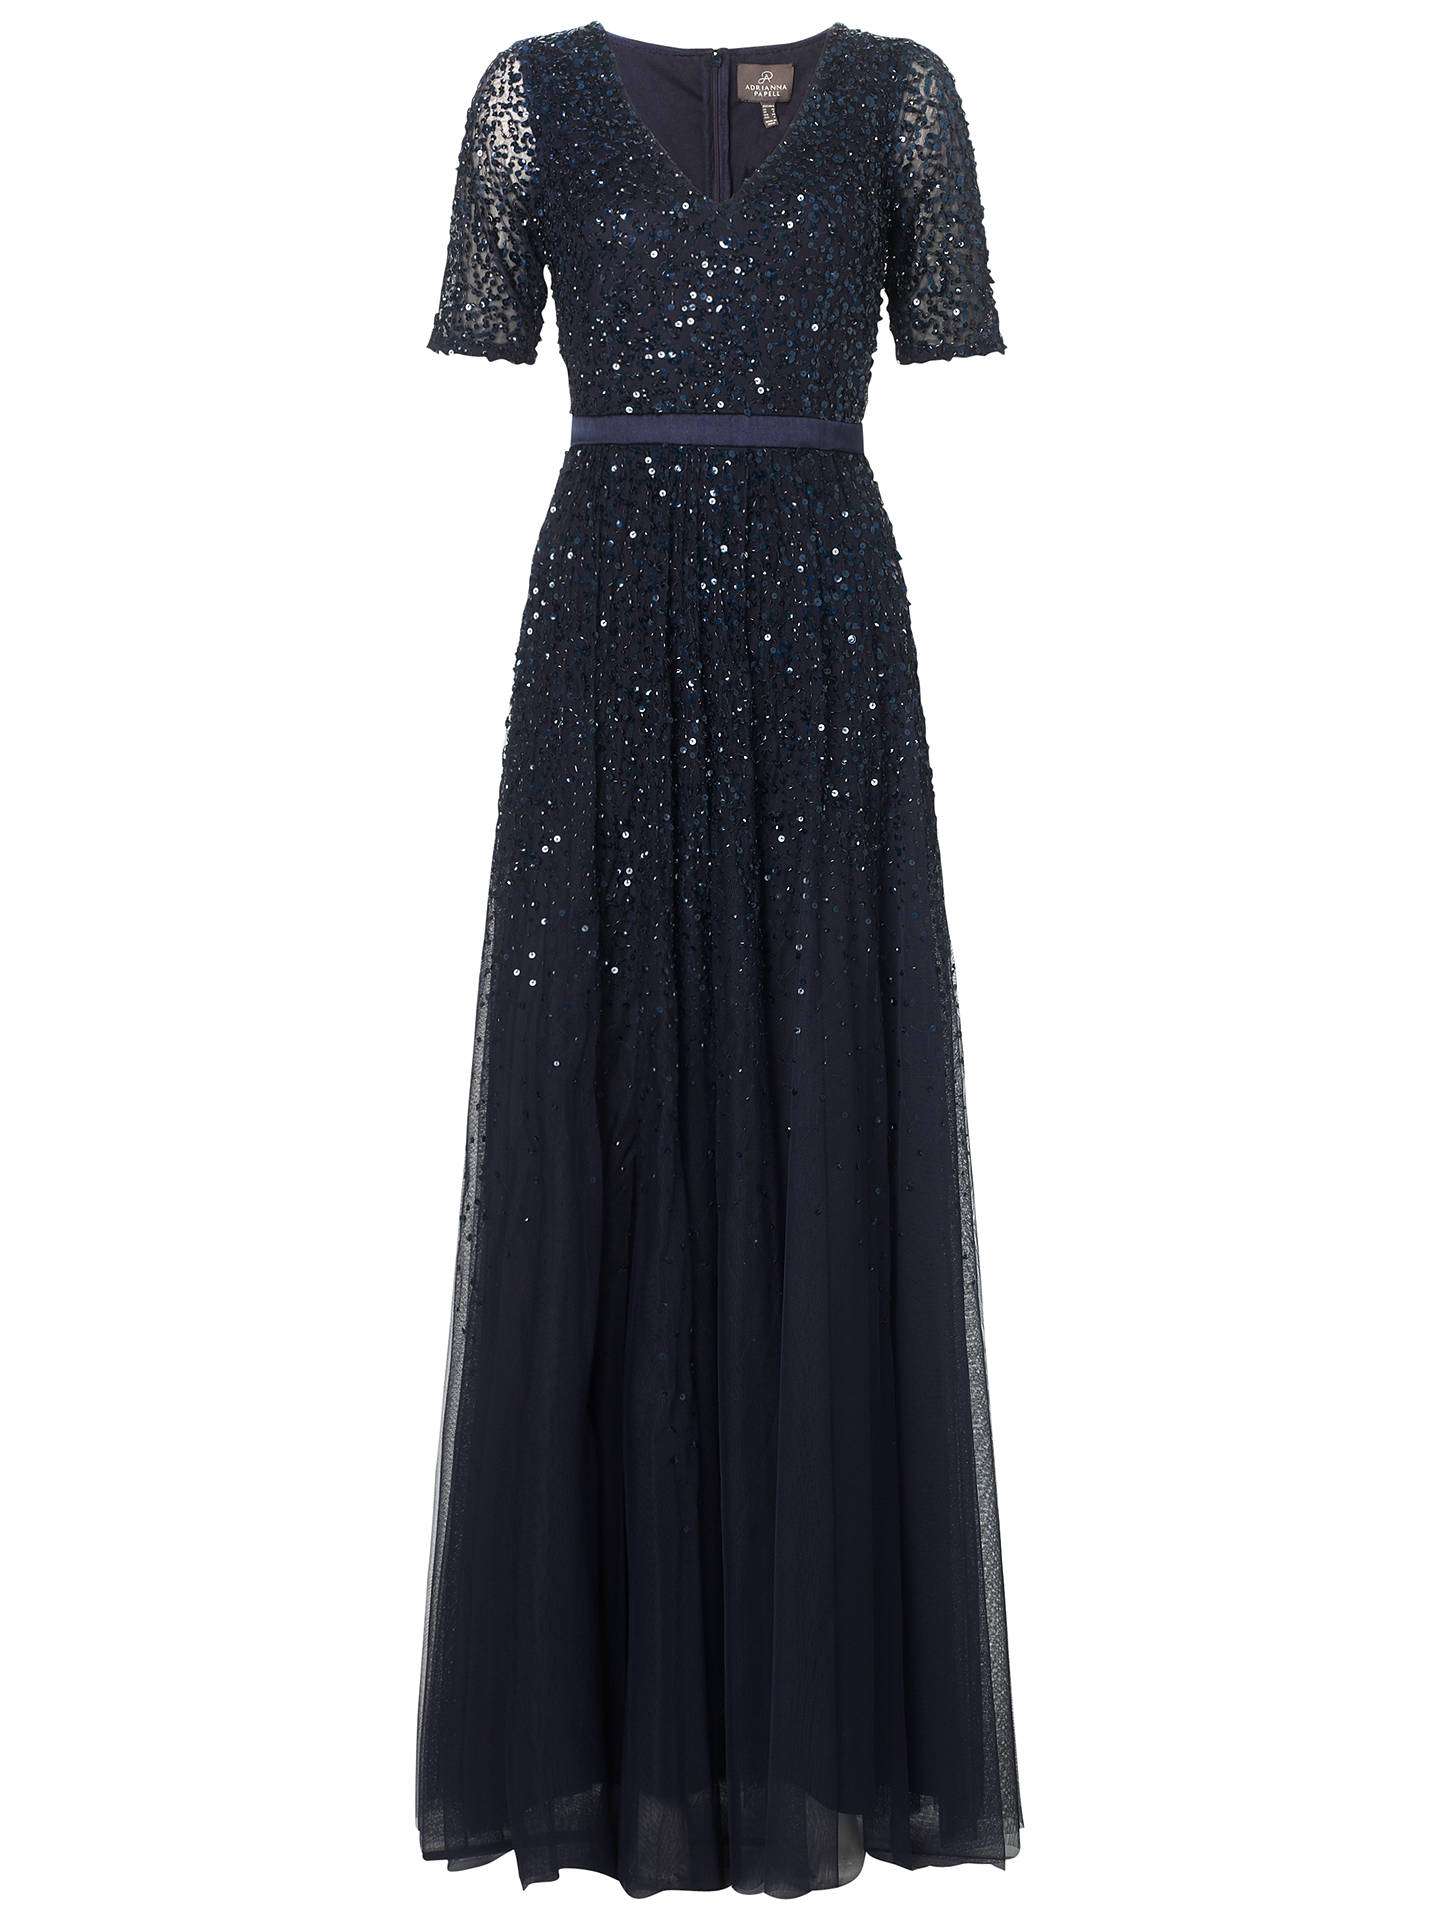 Adrianna Papell Sequin Ball Gown, Midnight Blue at John Lewis & Partners